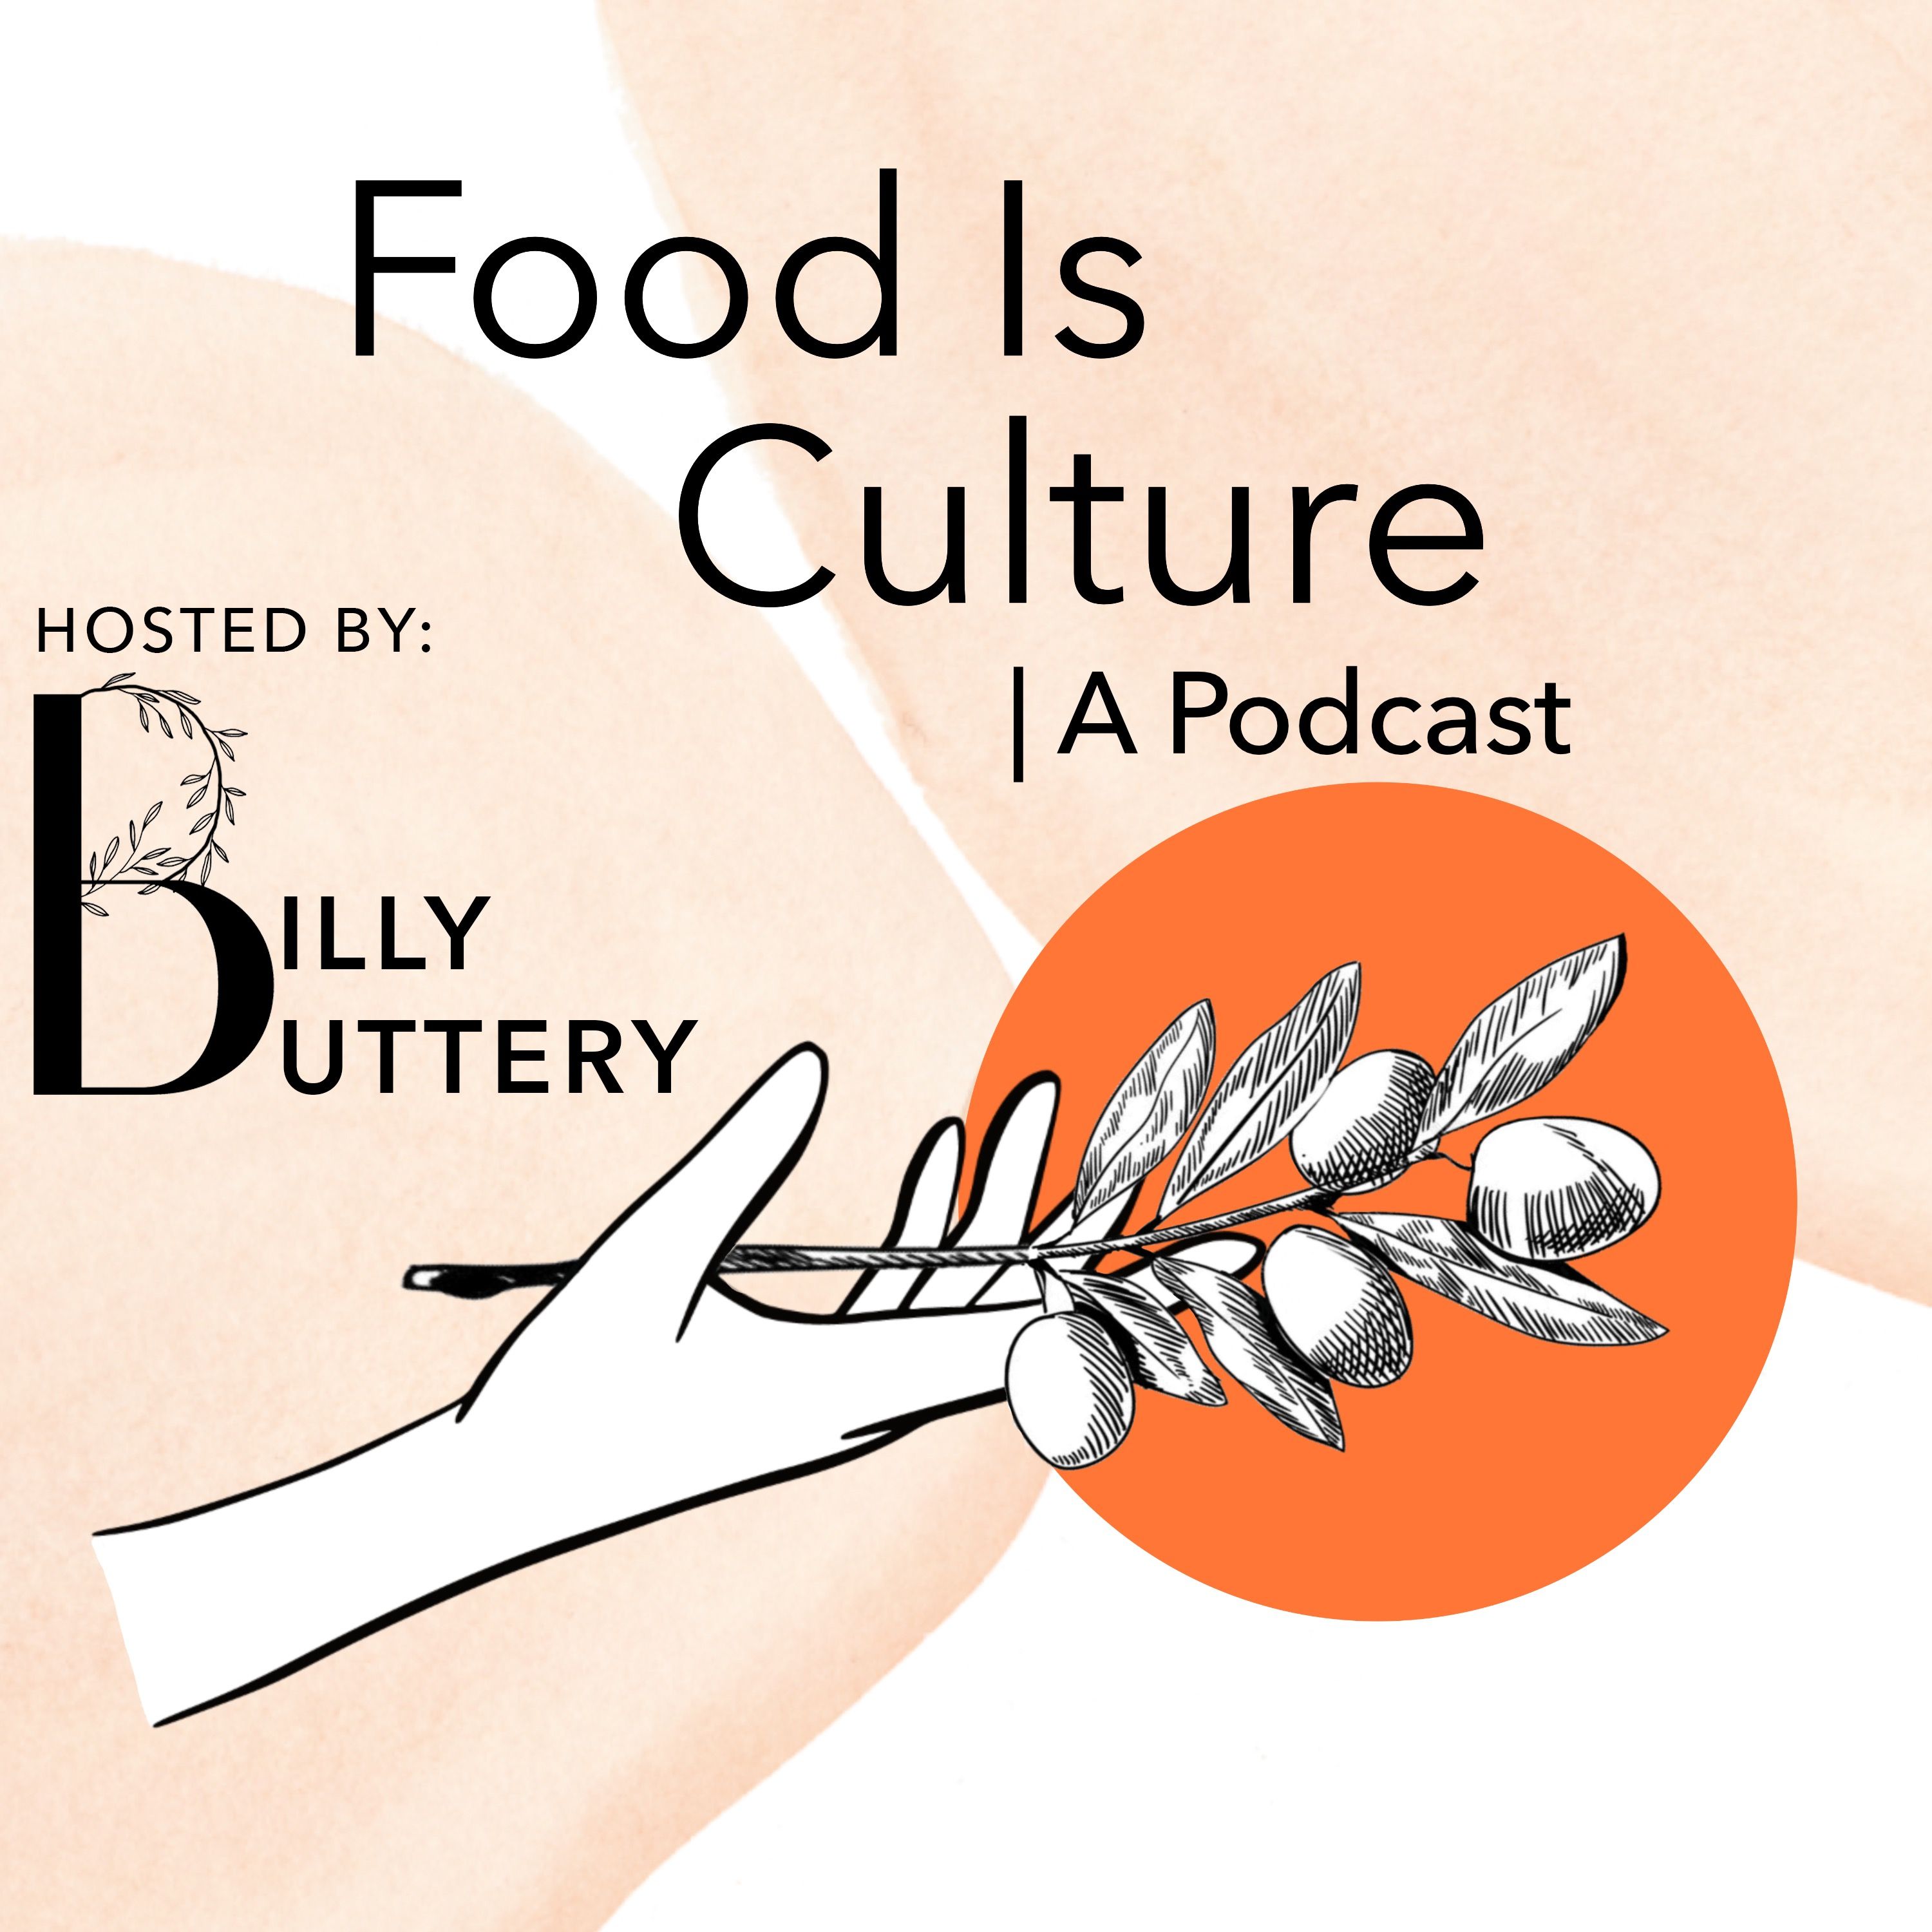 Food Is Culture | A Podcast